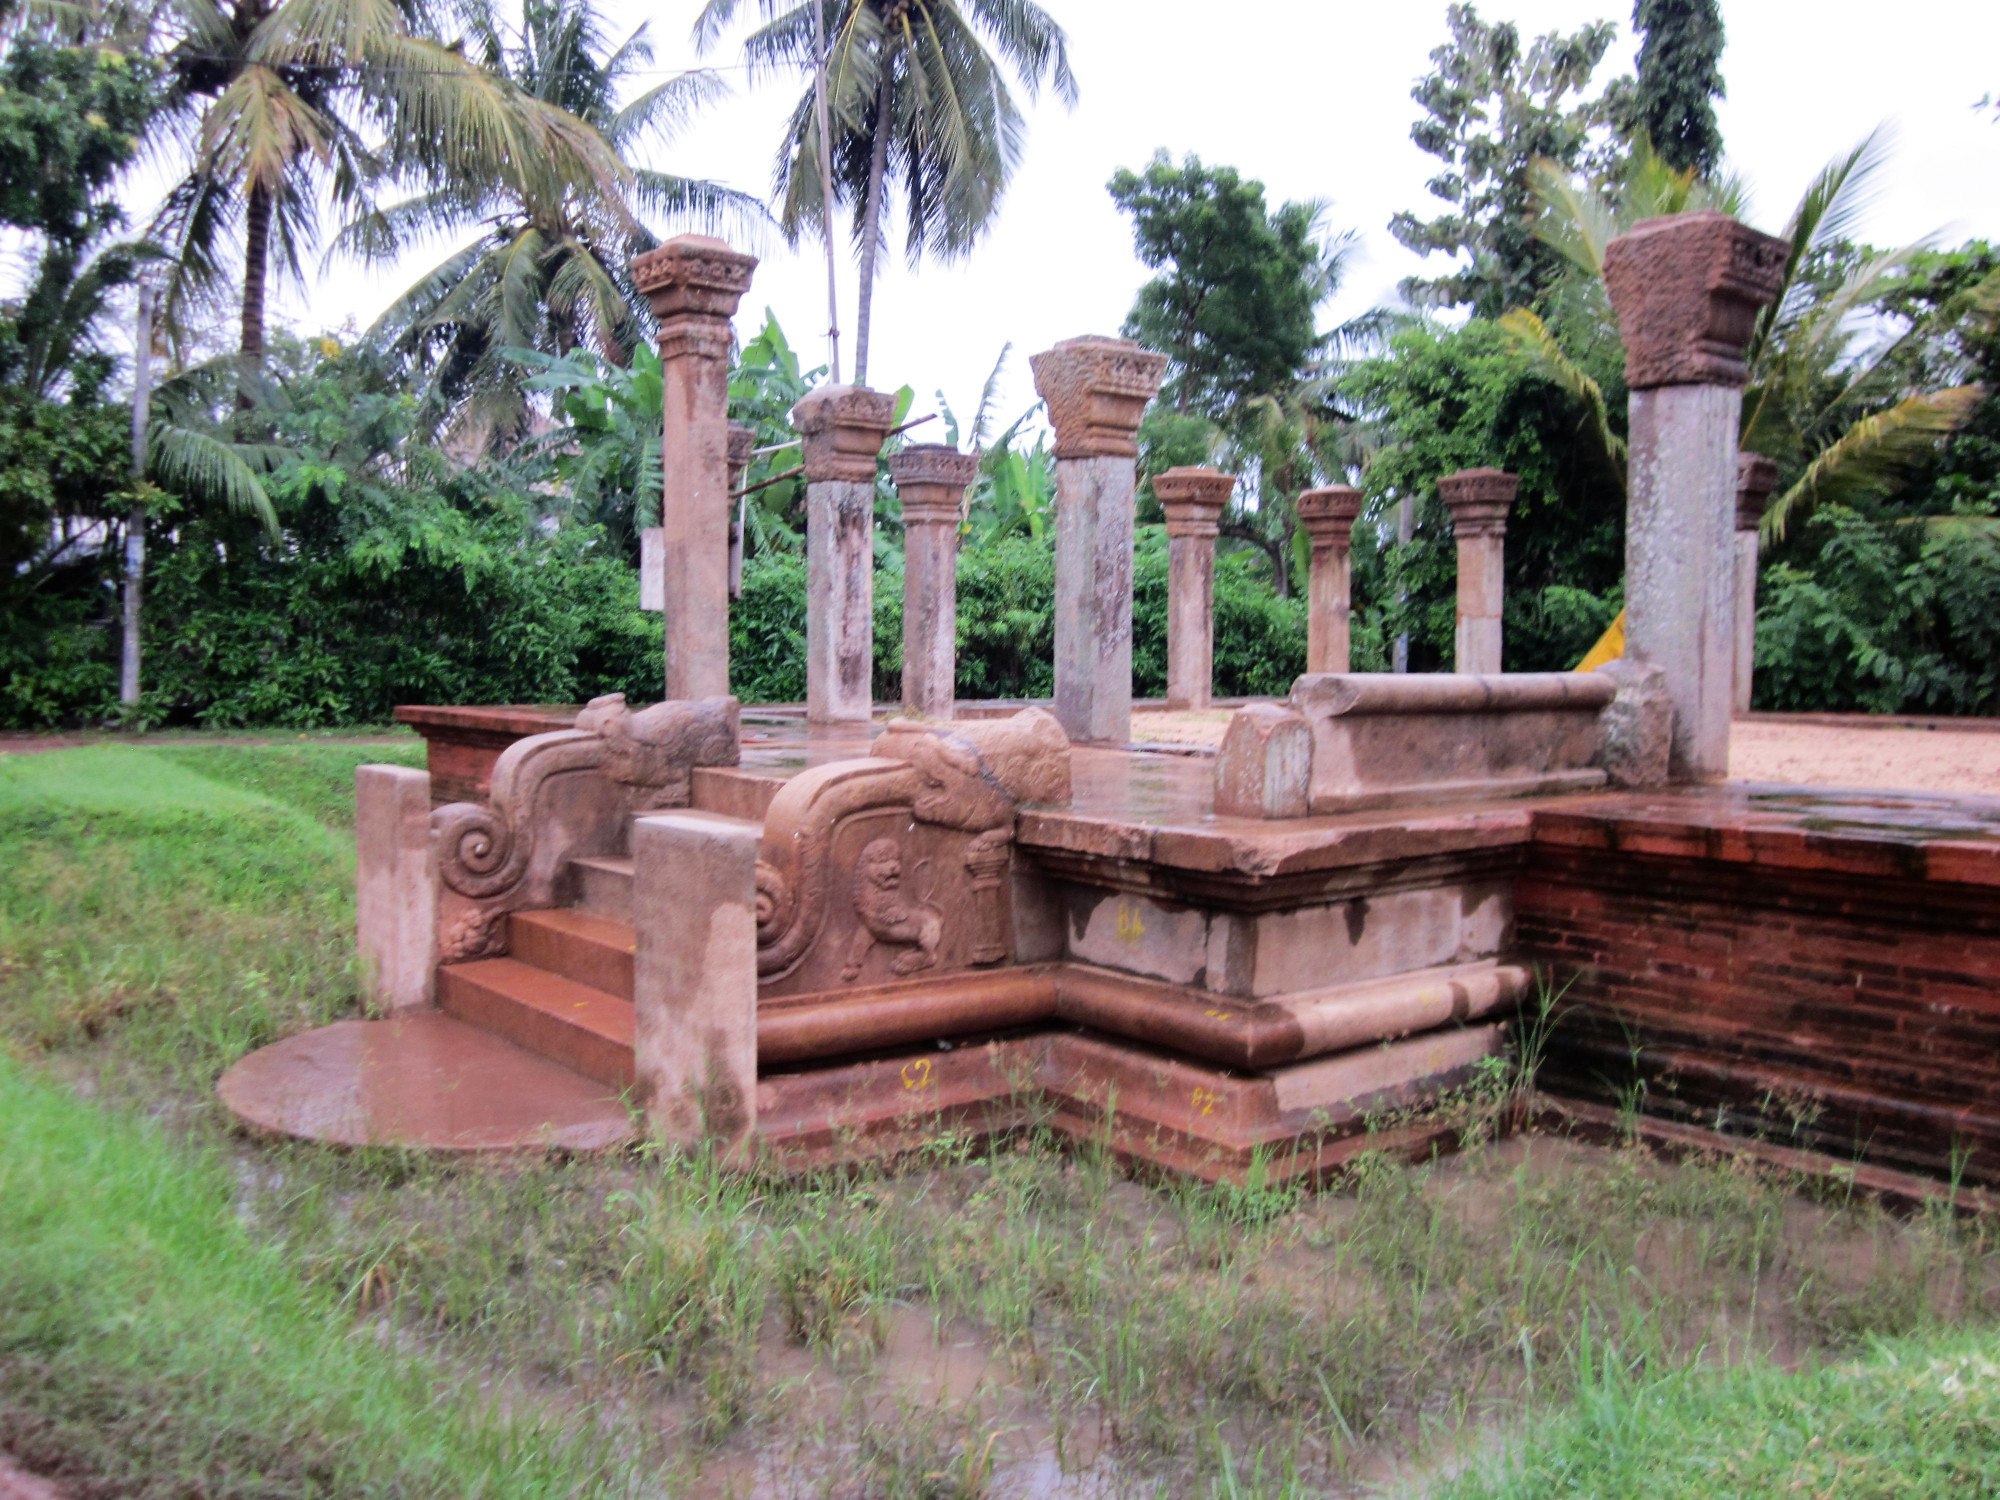 The Ancient city designated World Hertitage Site has numerpus historical Temples and shrines — preserved carved pillars at Jetavana Vihara